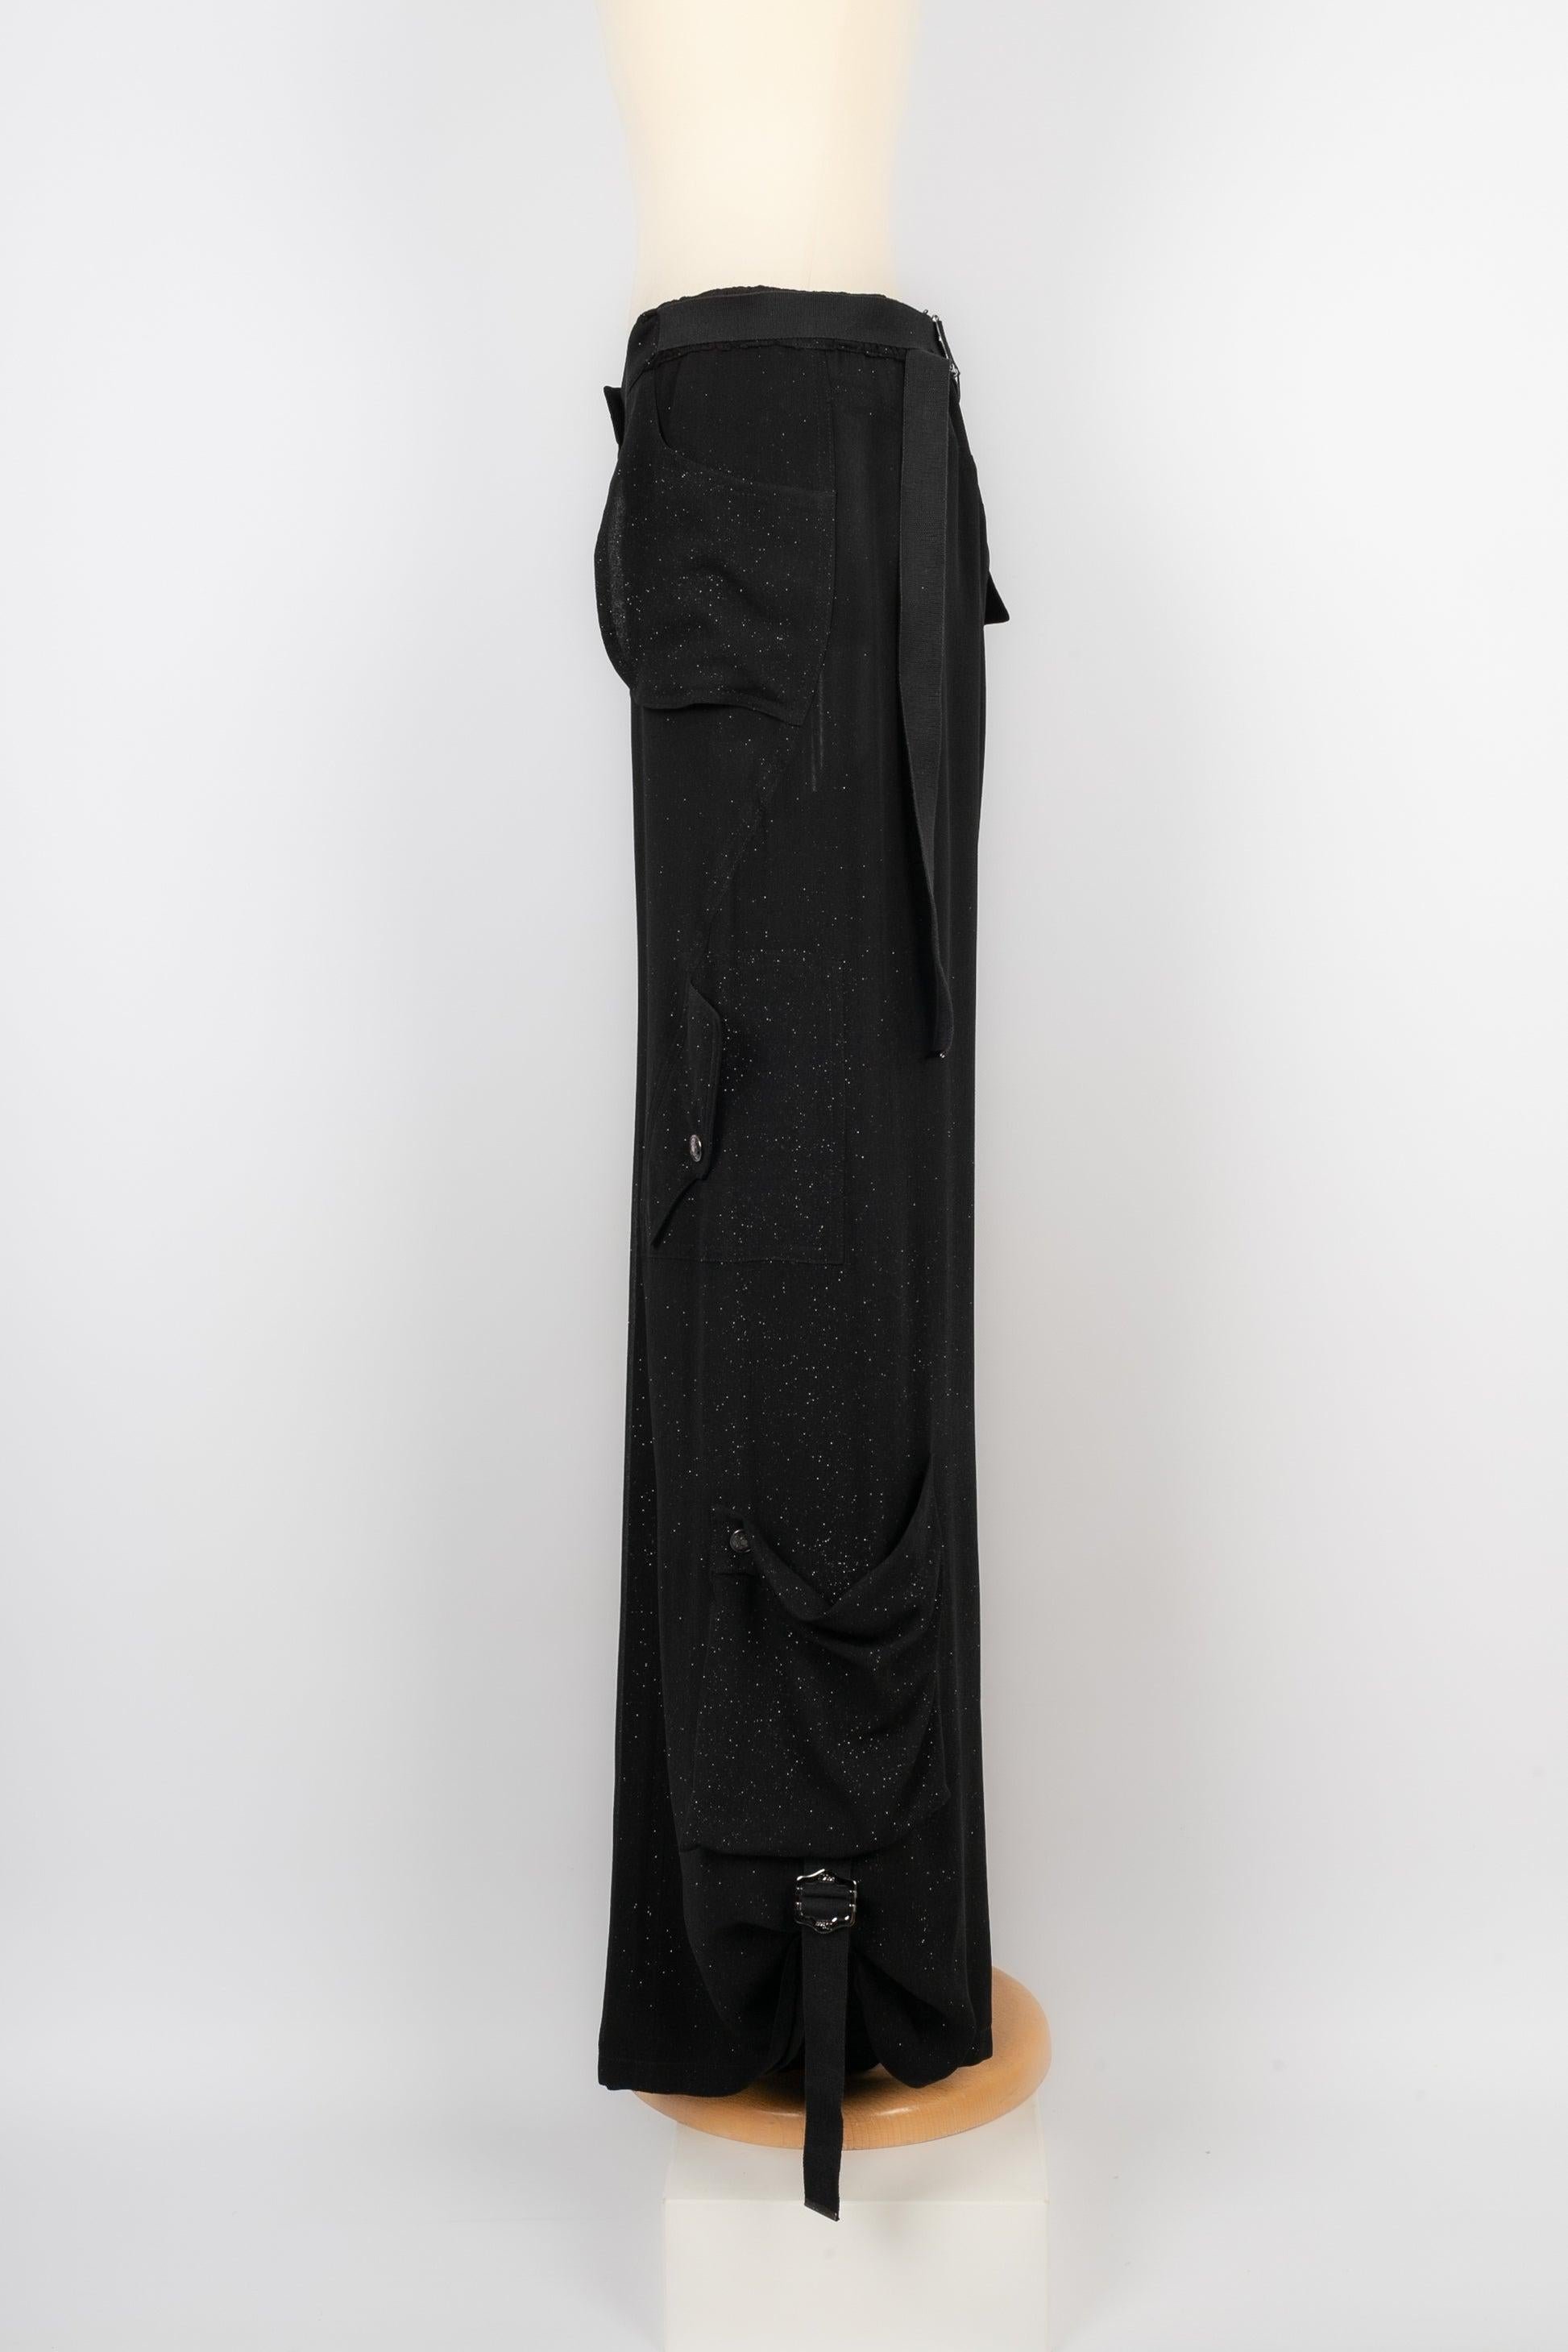 Dior- (Made in France) Sequined black silk pants. 2003 Fall-Winter Collection. Size 38FR.

Additional information:
Condition: Very good condition
Dimensions: Waist: 39 cm - Length: 105 cm
Seller Reference: FJ84
